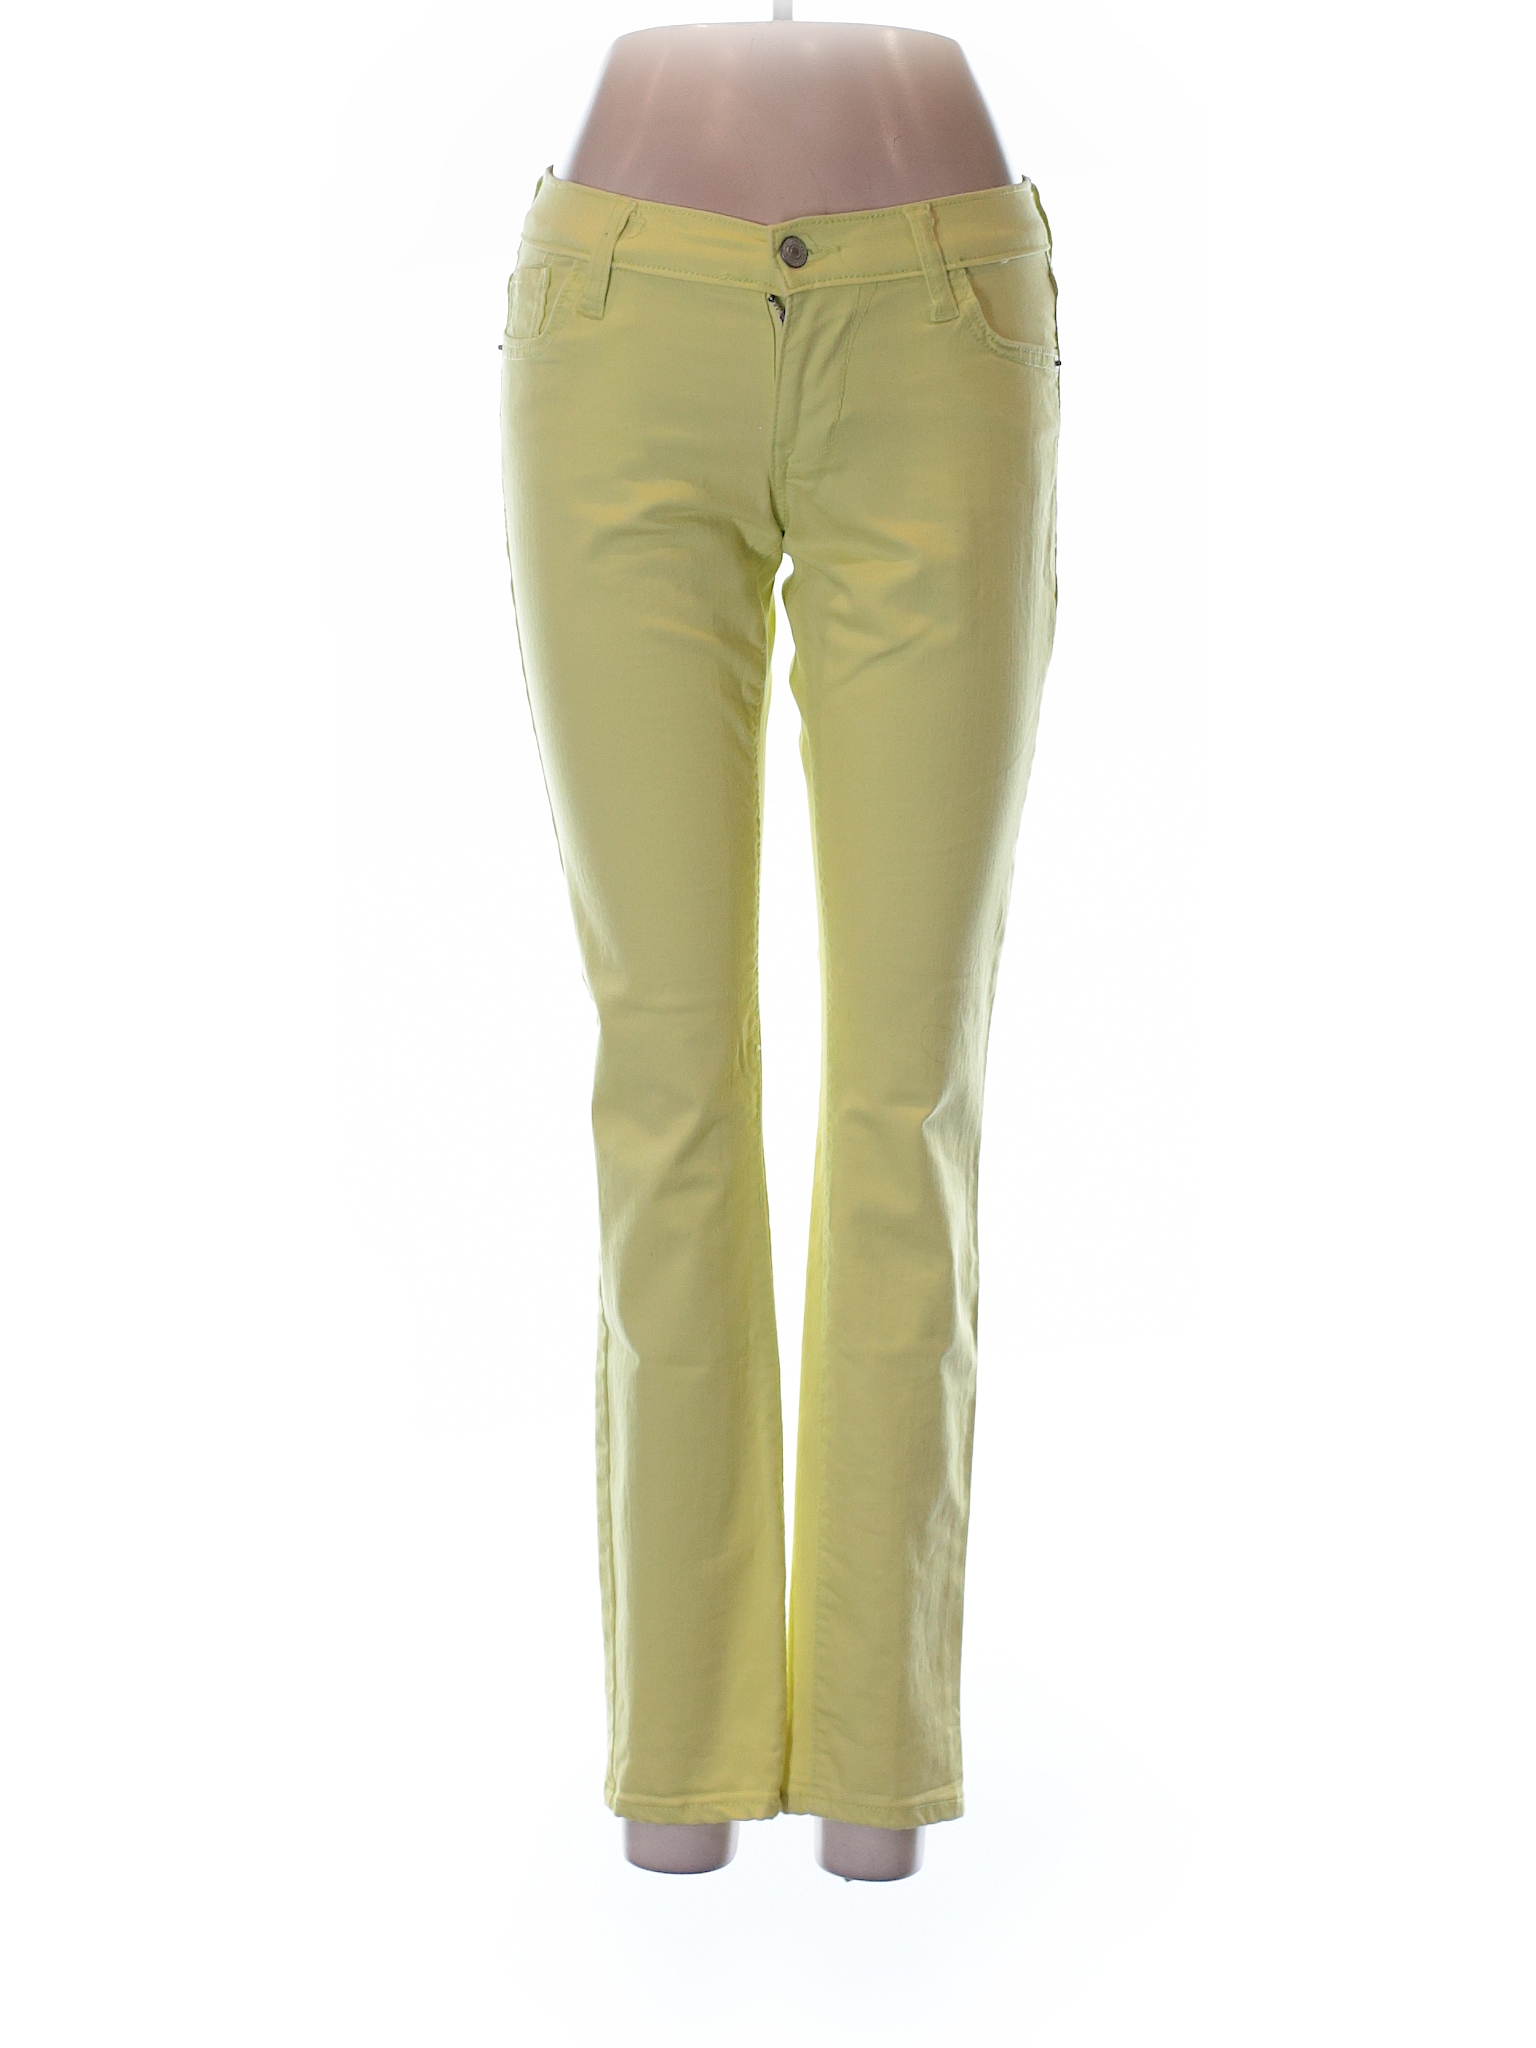 Old Navy Solid Yellow Jeans Size 4 - 68% off | thredUP